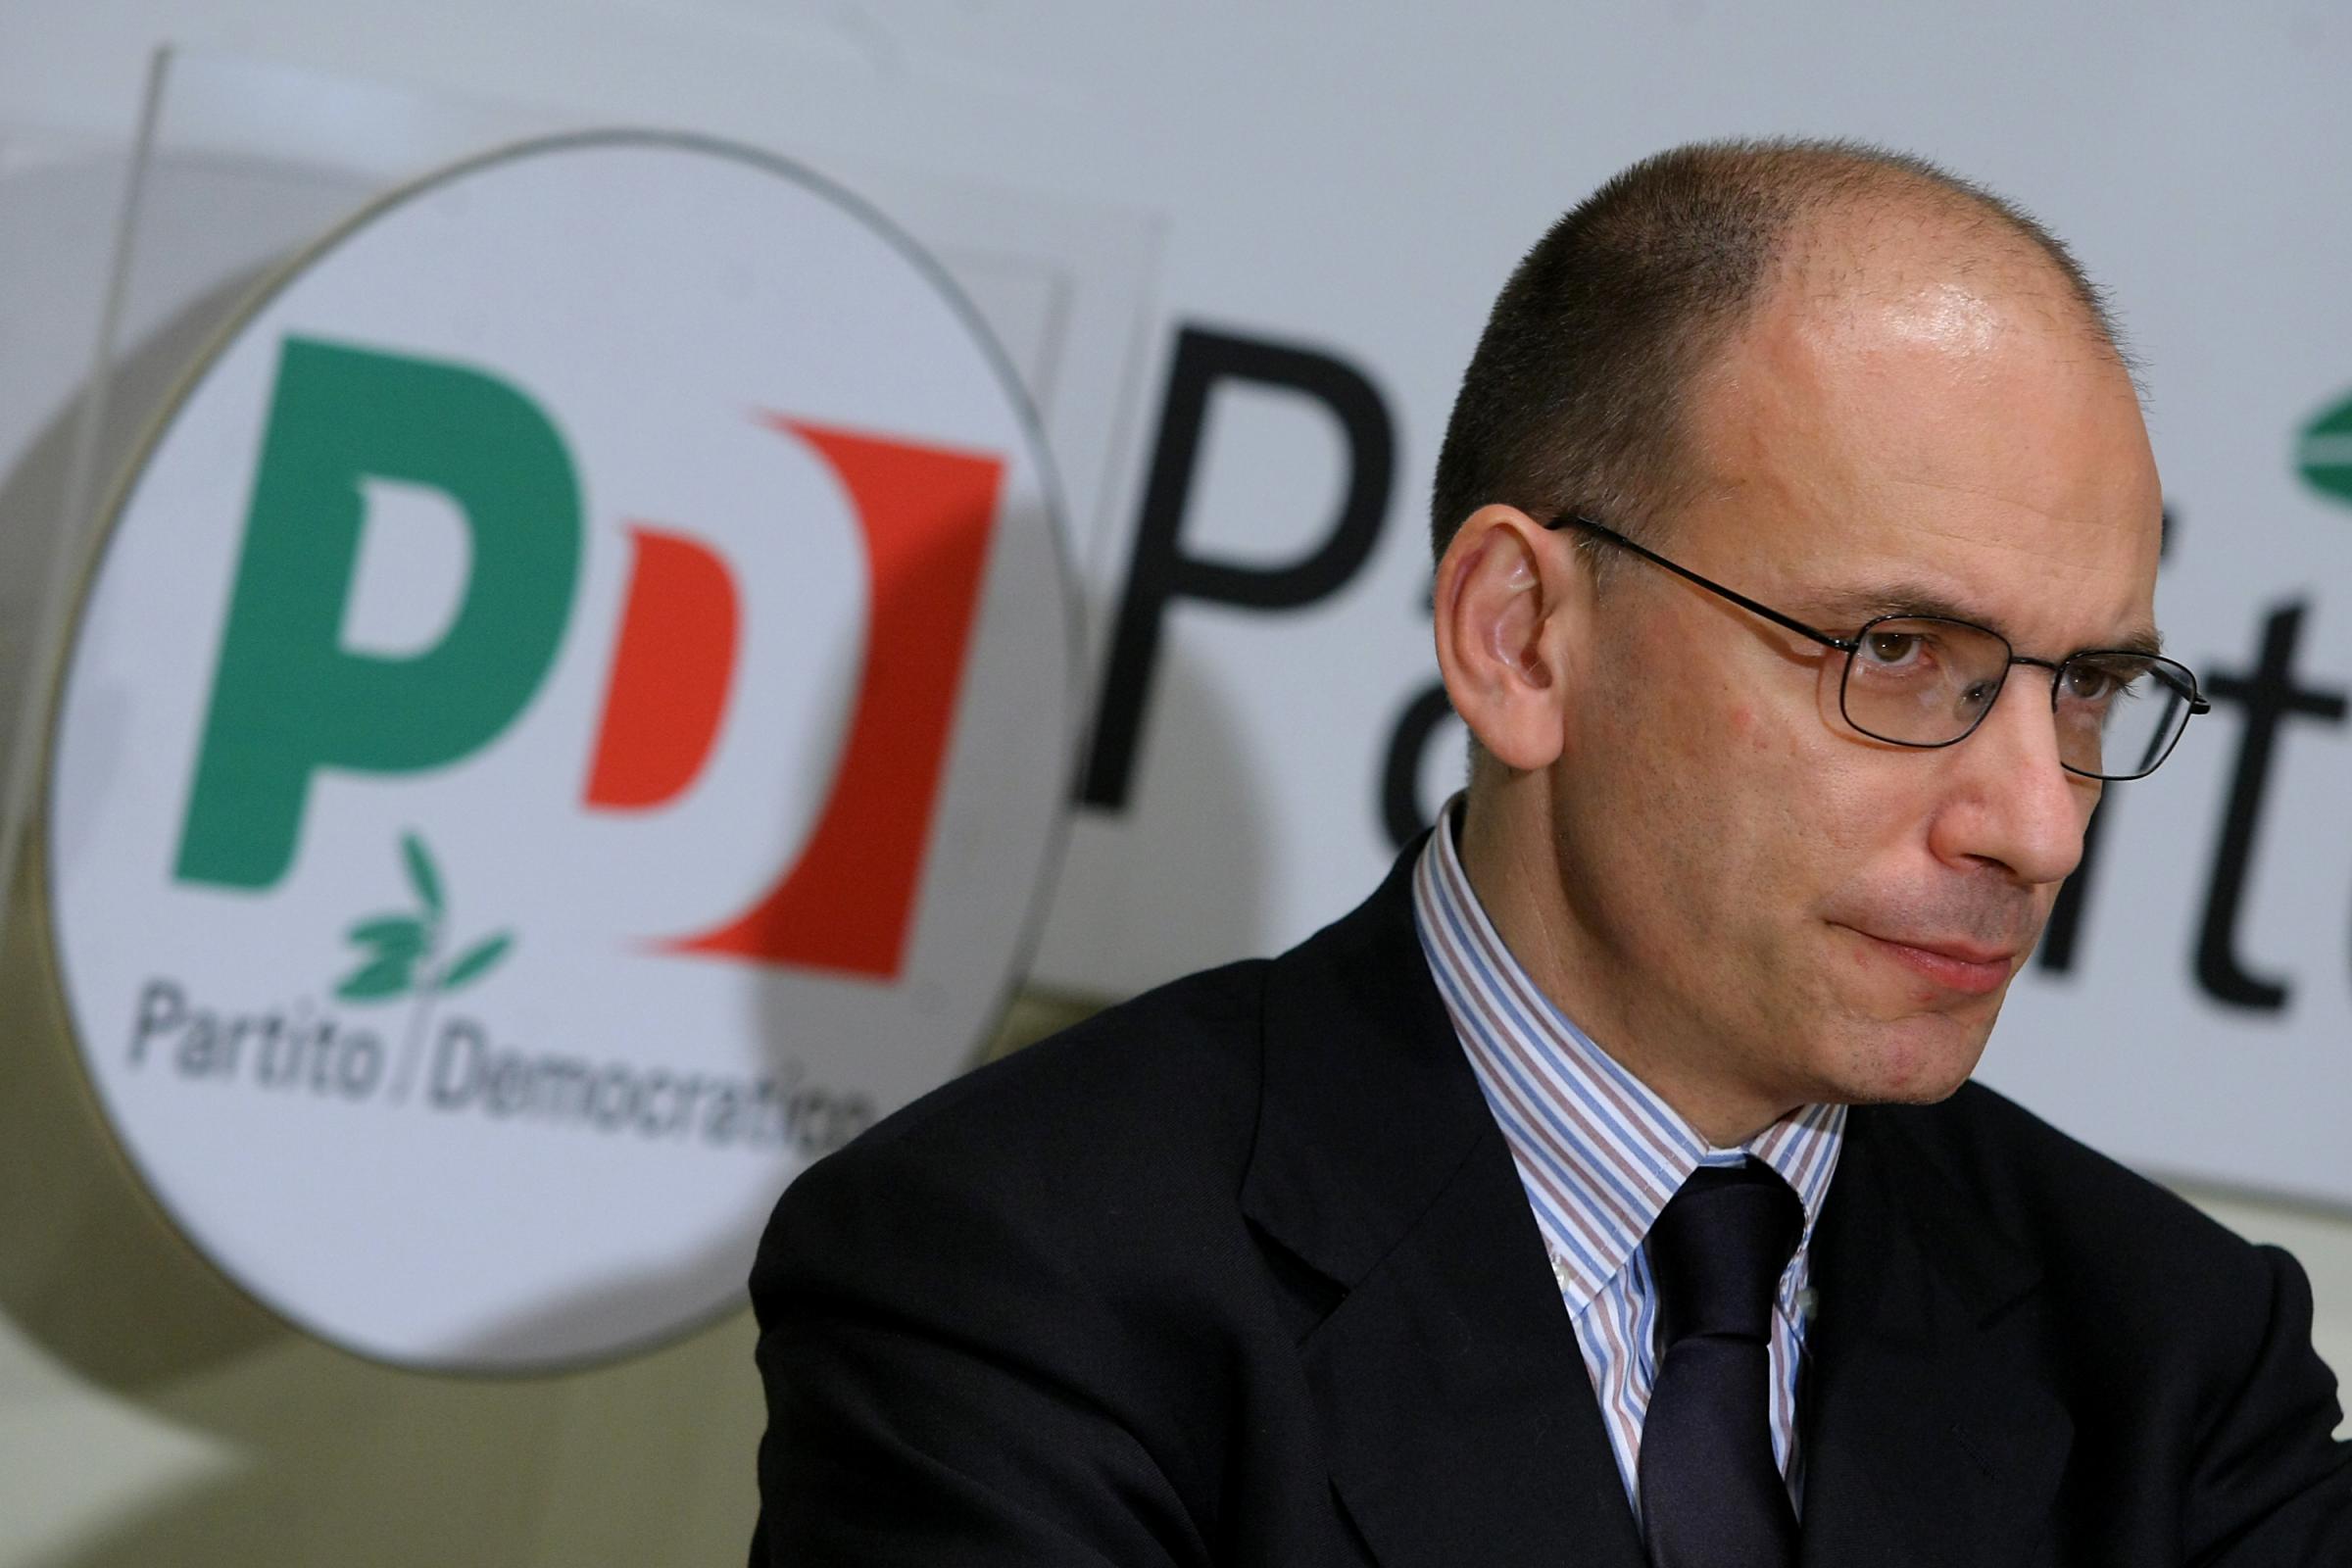 letta-governo-monti-pd-pdl-jpg-crop_display